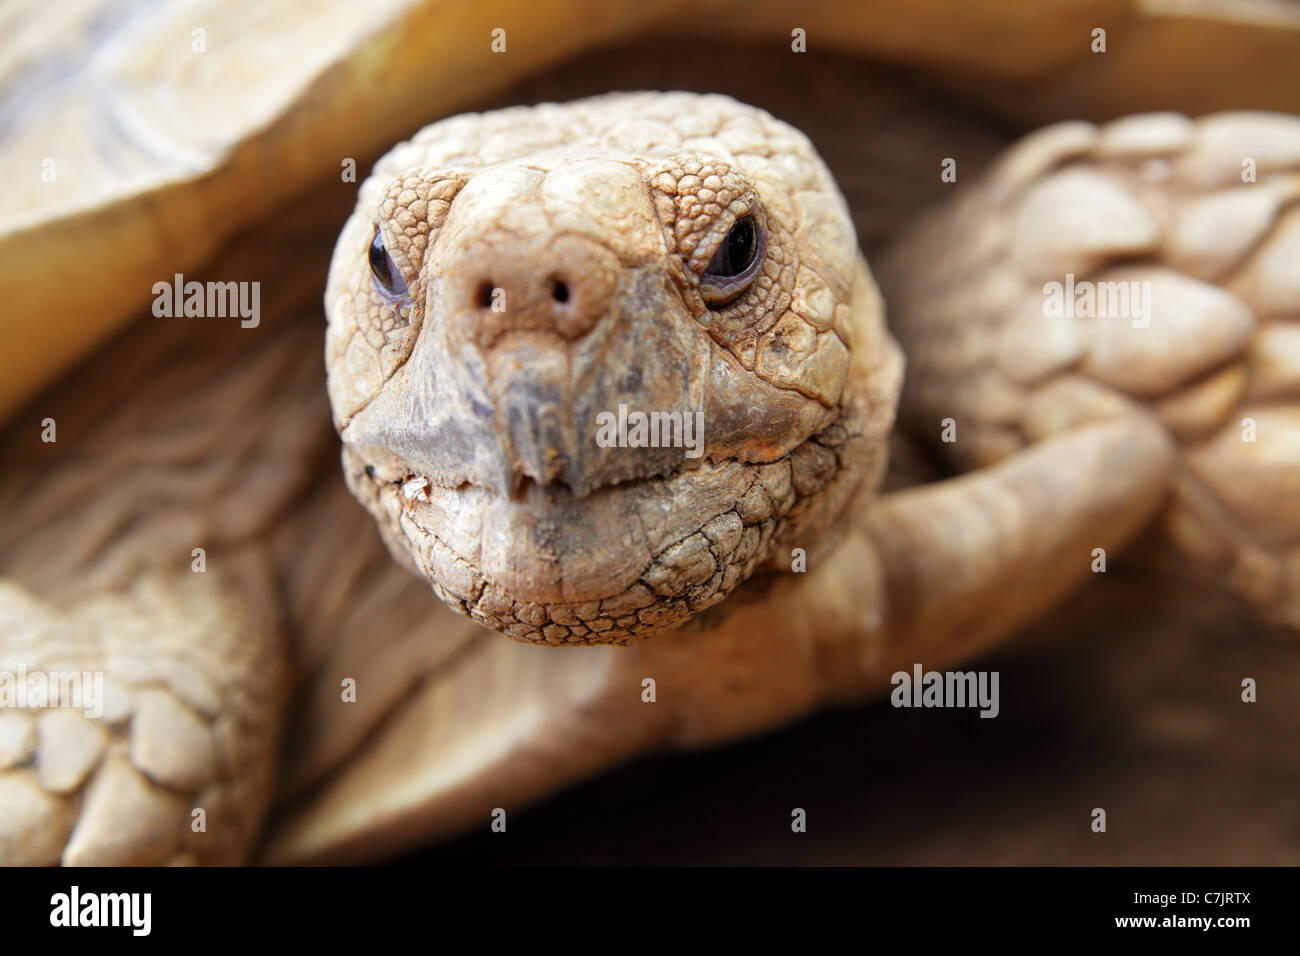 Portrait of a giant tortoise close up Stock Photo